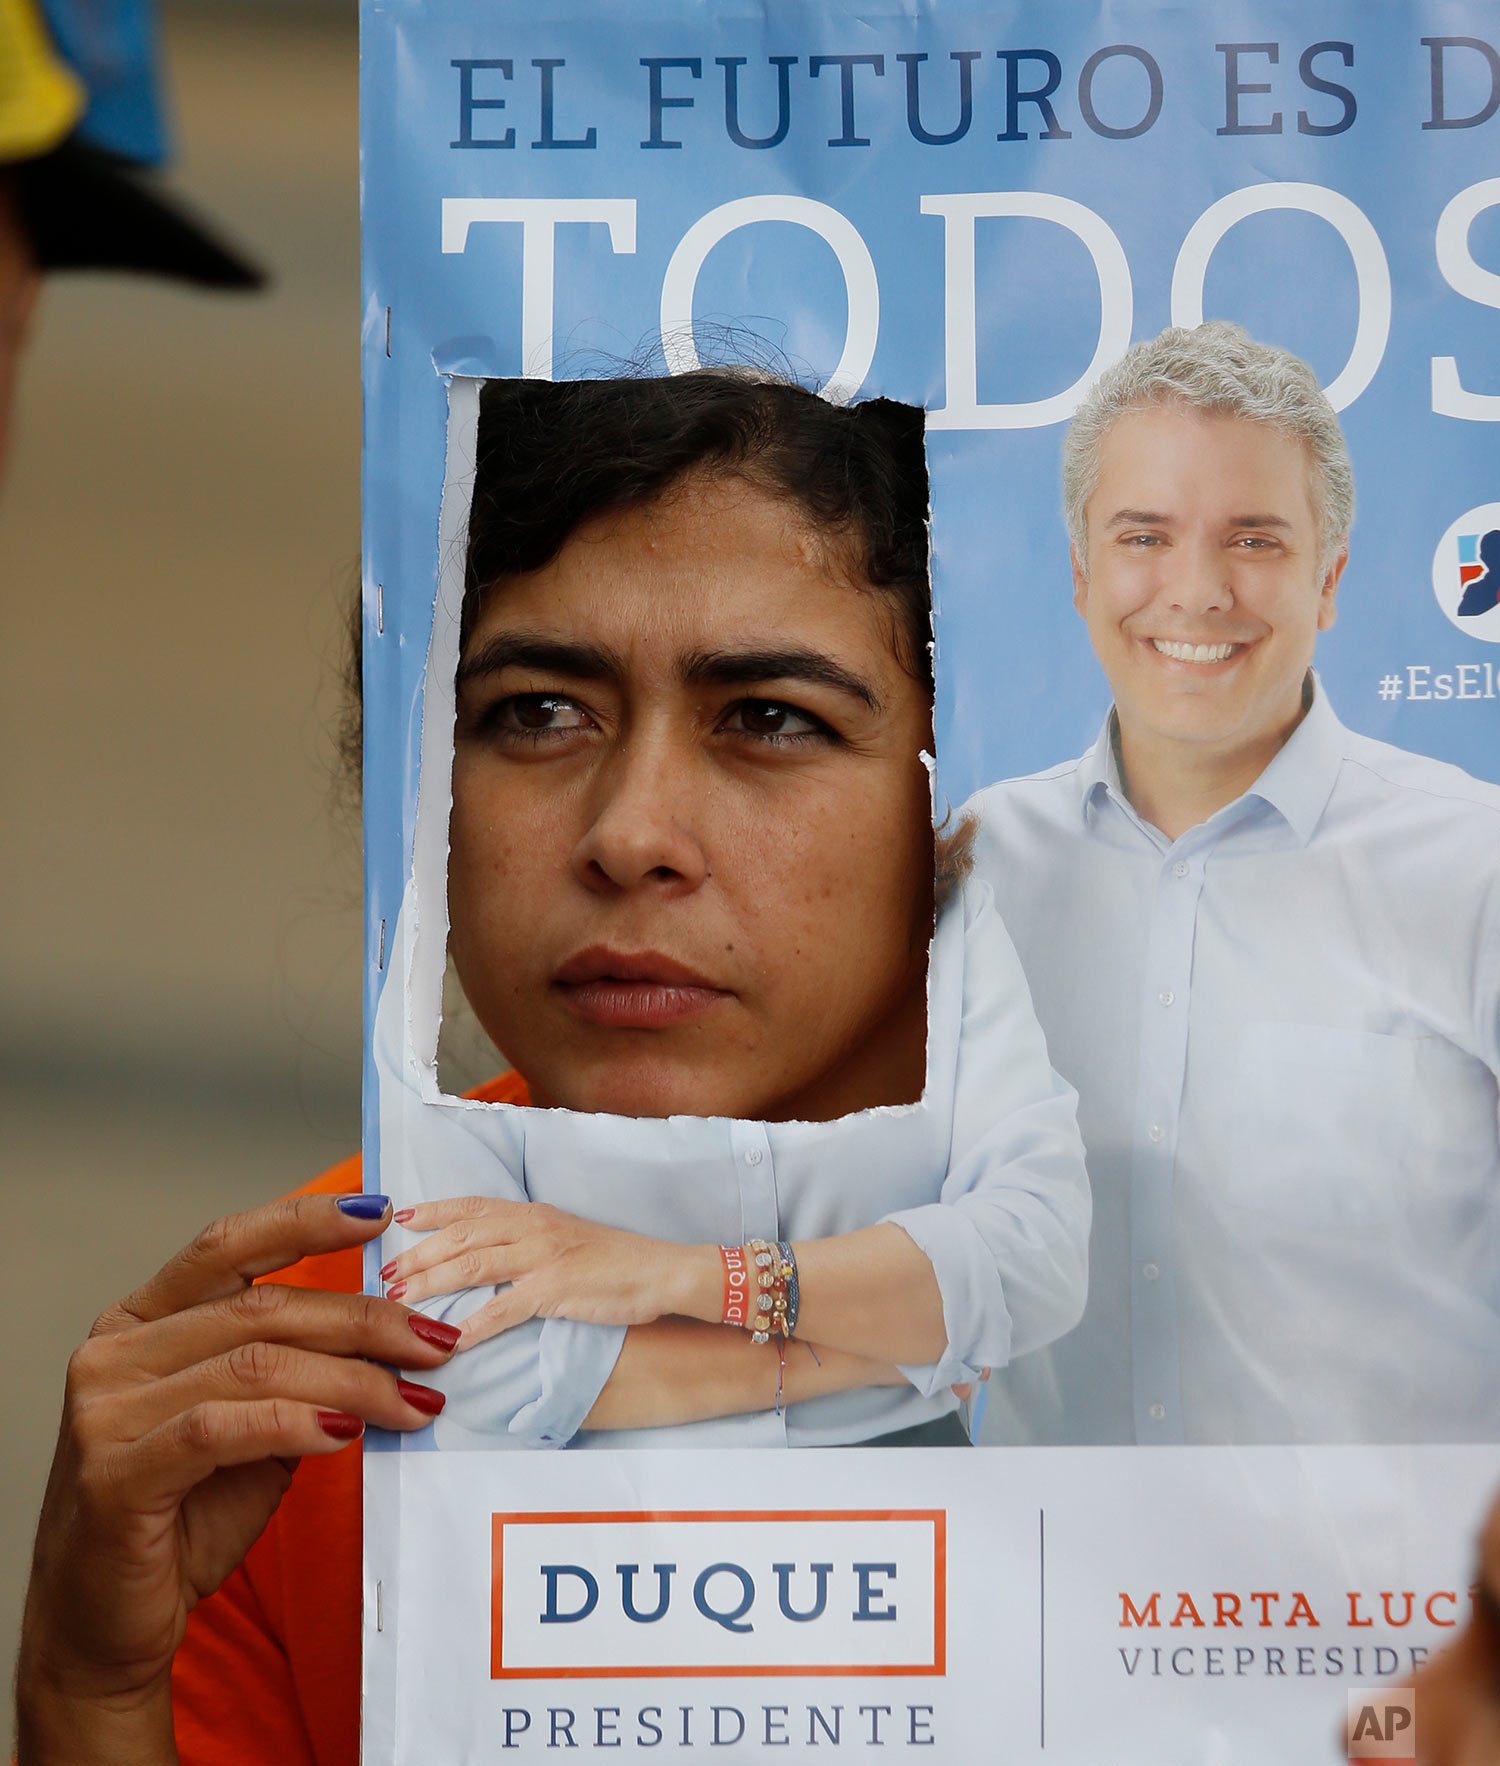  A supporter of presidential candidate Ivan Duque attends his campaign rally in Armenia, Colombia, June 10, 2018. Duque, a former senator and protege of former President Alvaro Uribe, won the contest over Gustavo Petro, a former rebel and Bogota mayo